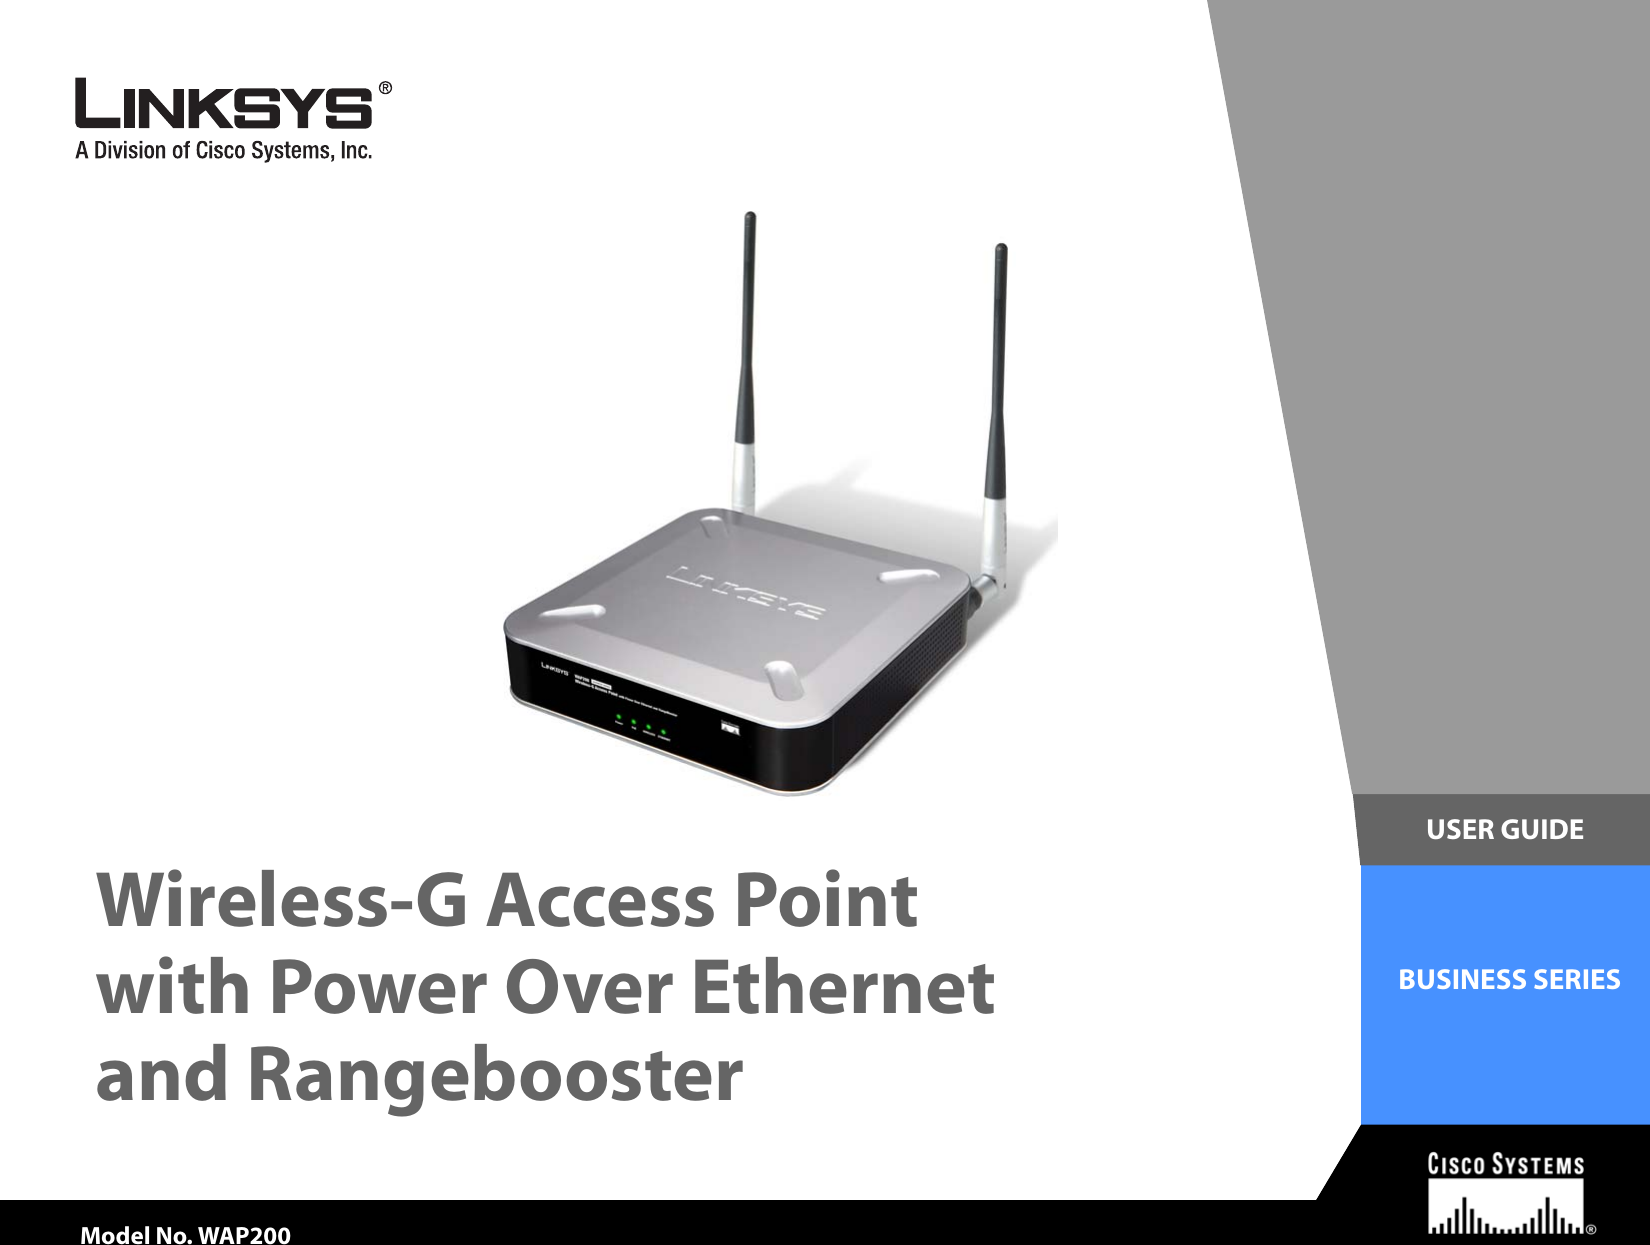 Model No.Model No.USER GUIDEBUSINESS SERIESModel No.Model No.Wireless-G Access Point Model No. WAP200with Power Over Ethernet and Rangebooster